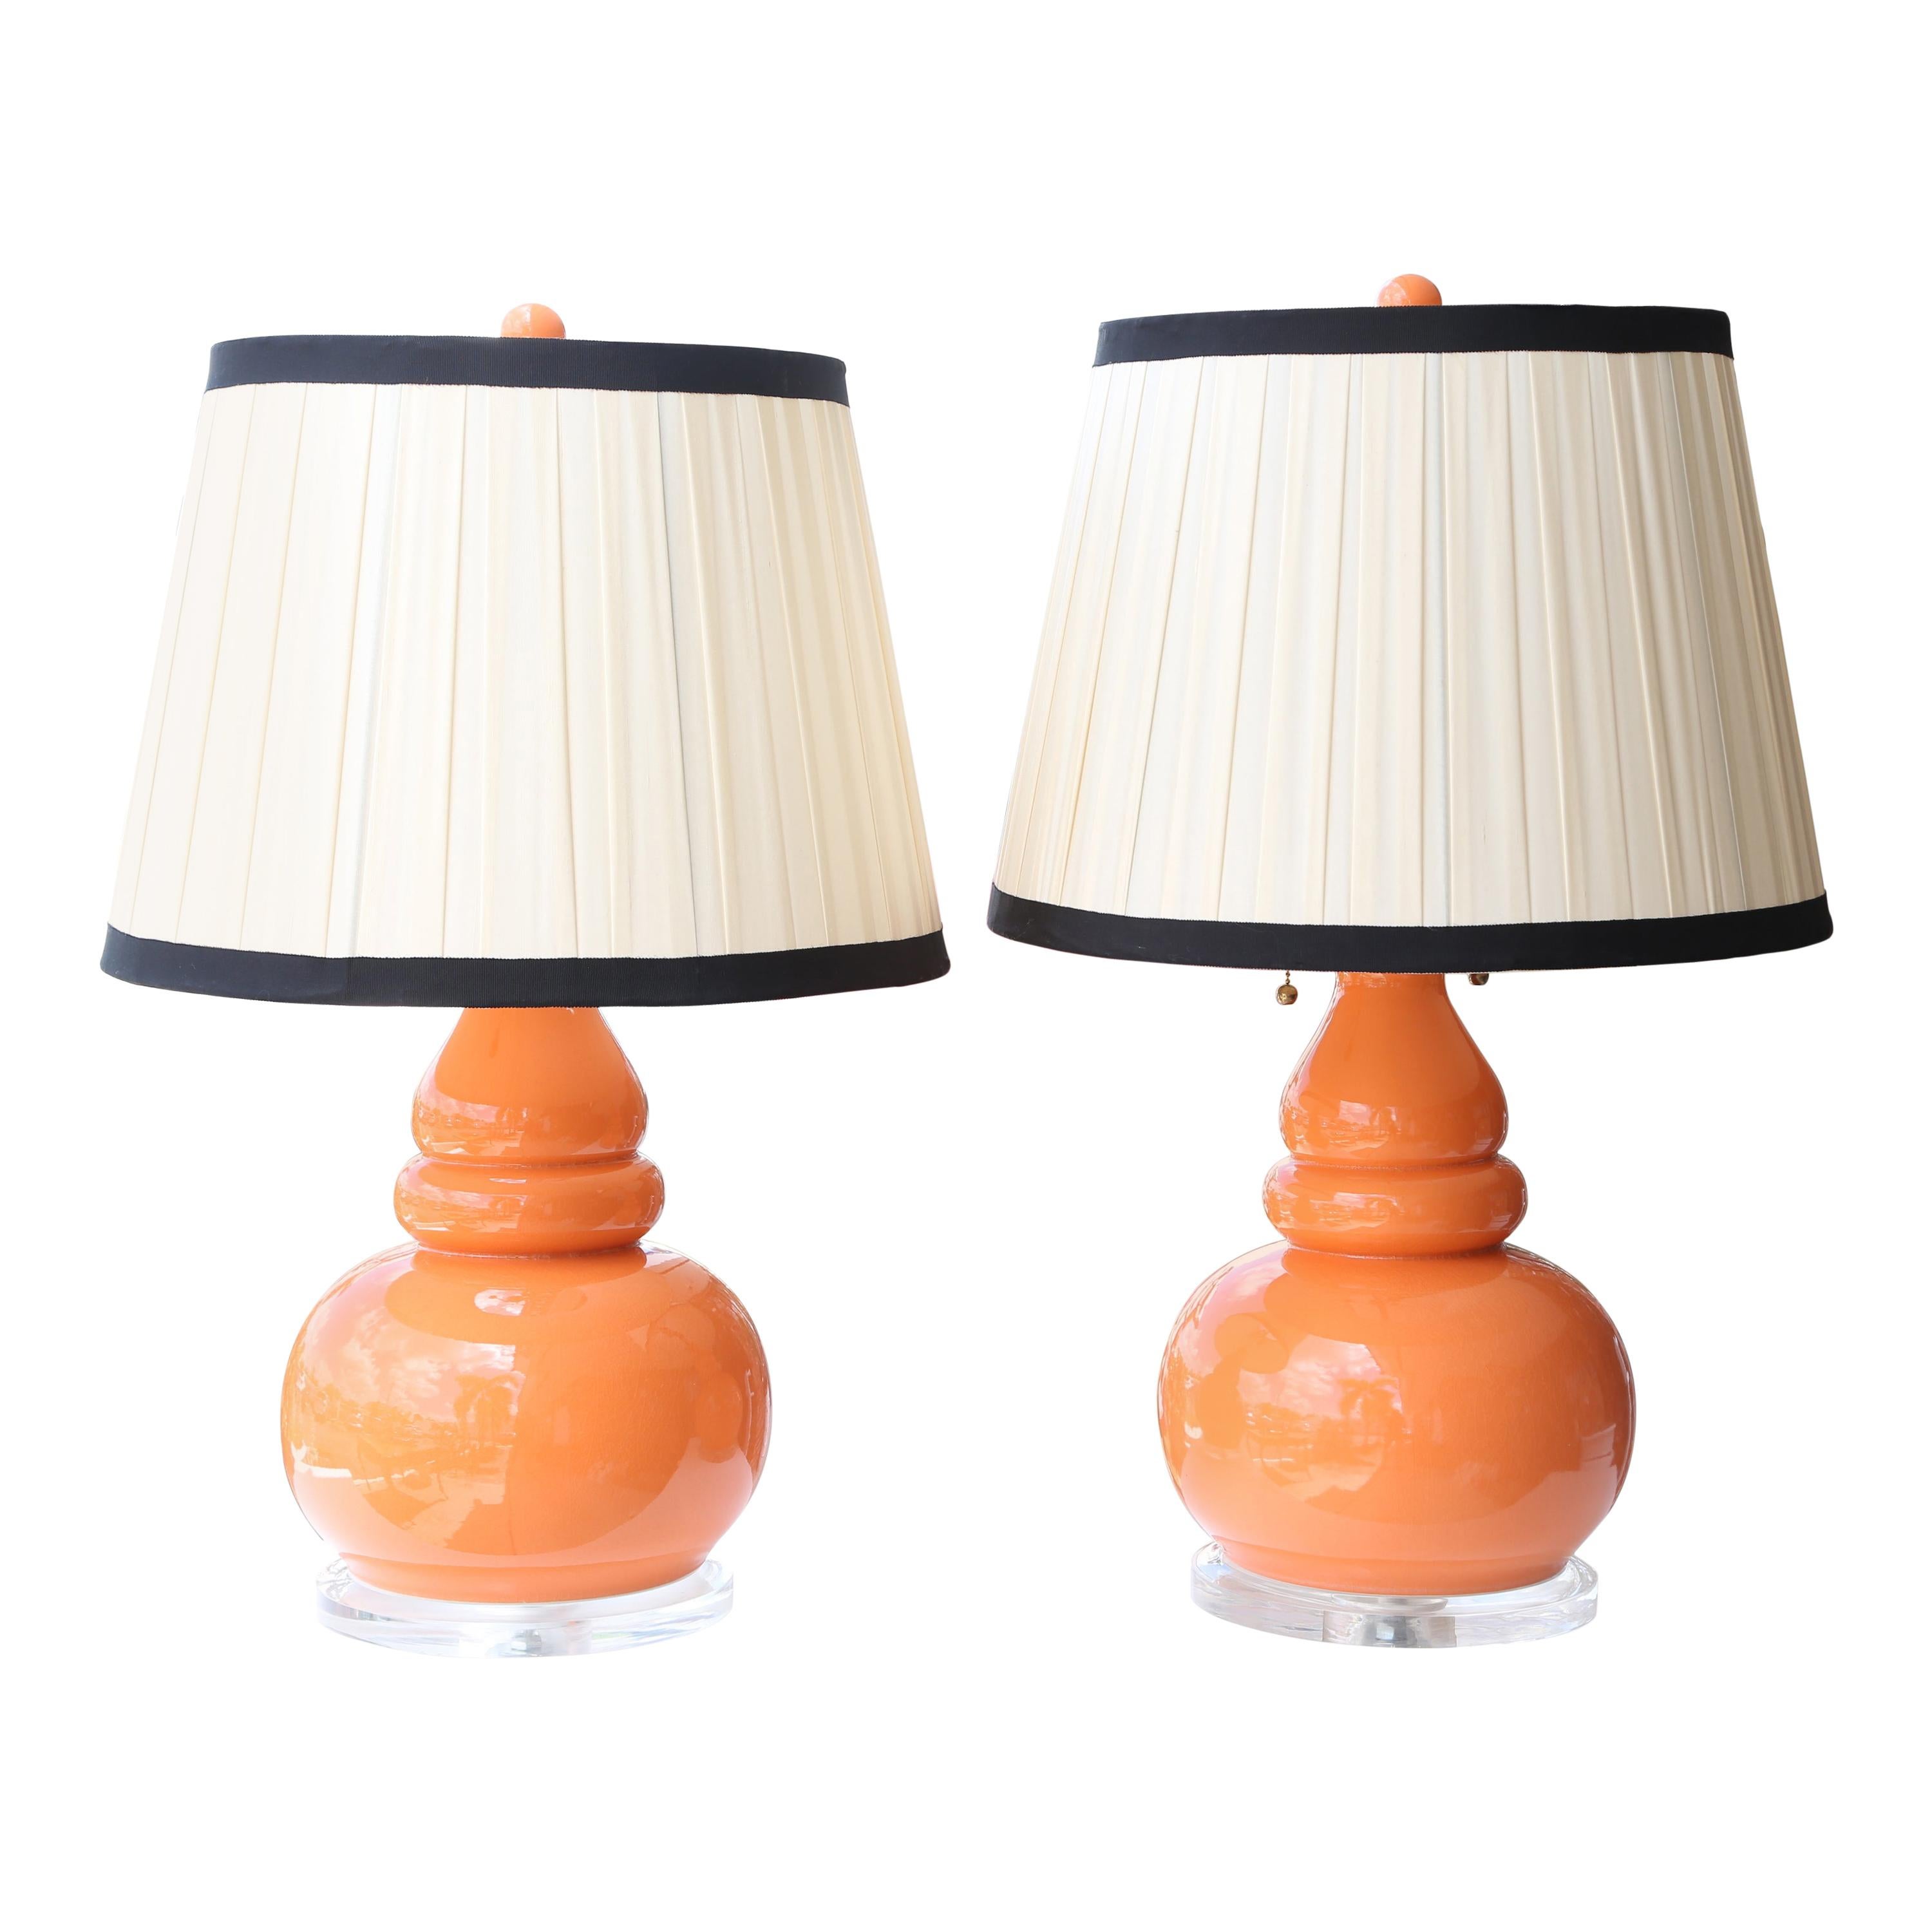 Pair of Vintage Gourd Lamps For Sale at 1stDibs